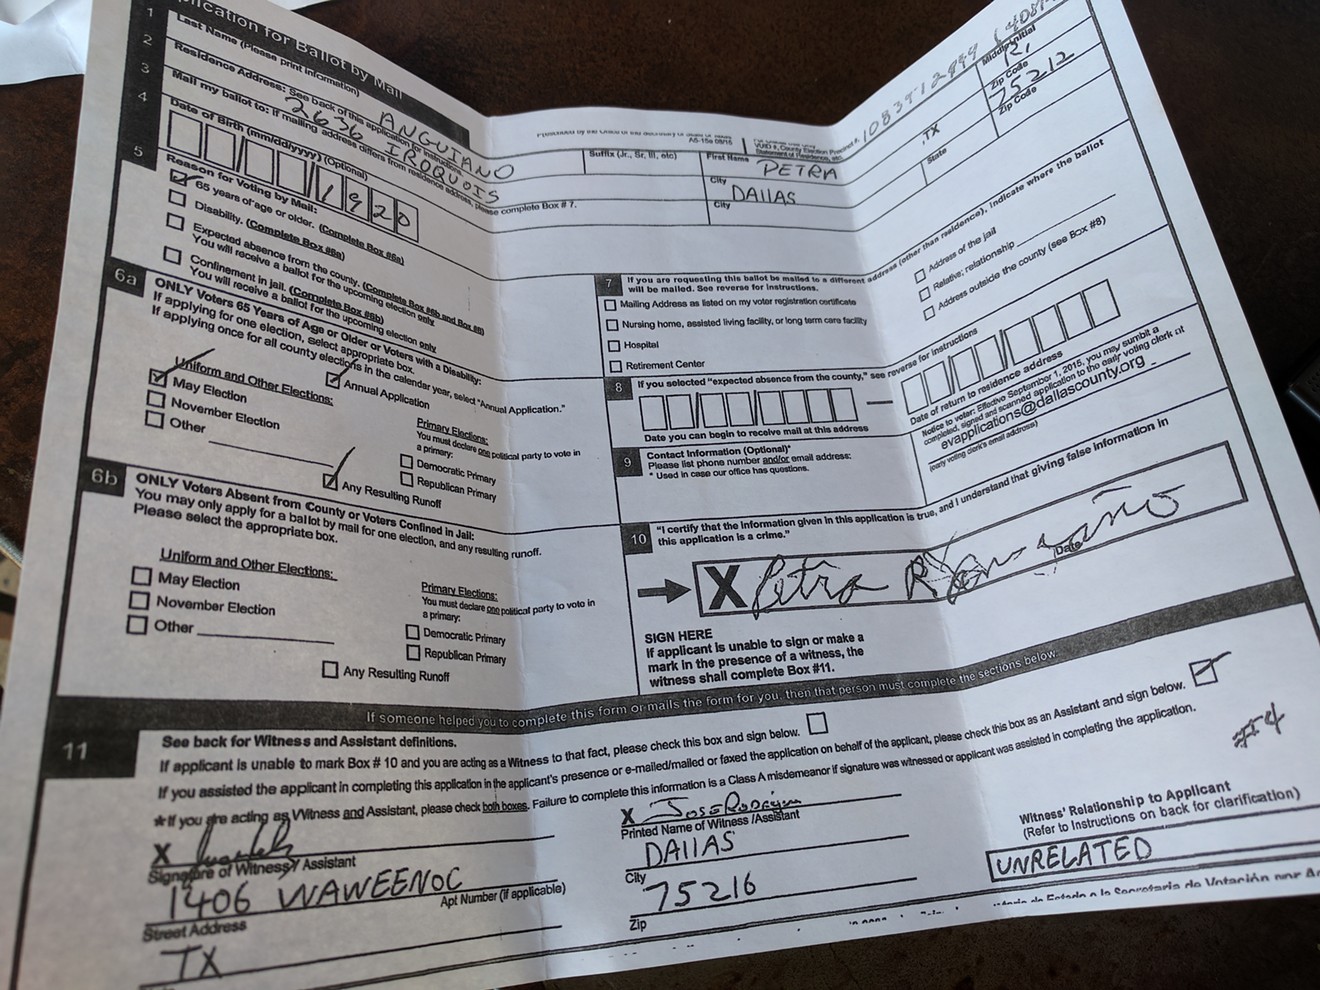 "Jose Rodriguez" signed an application for a mail-in ballot.